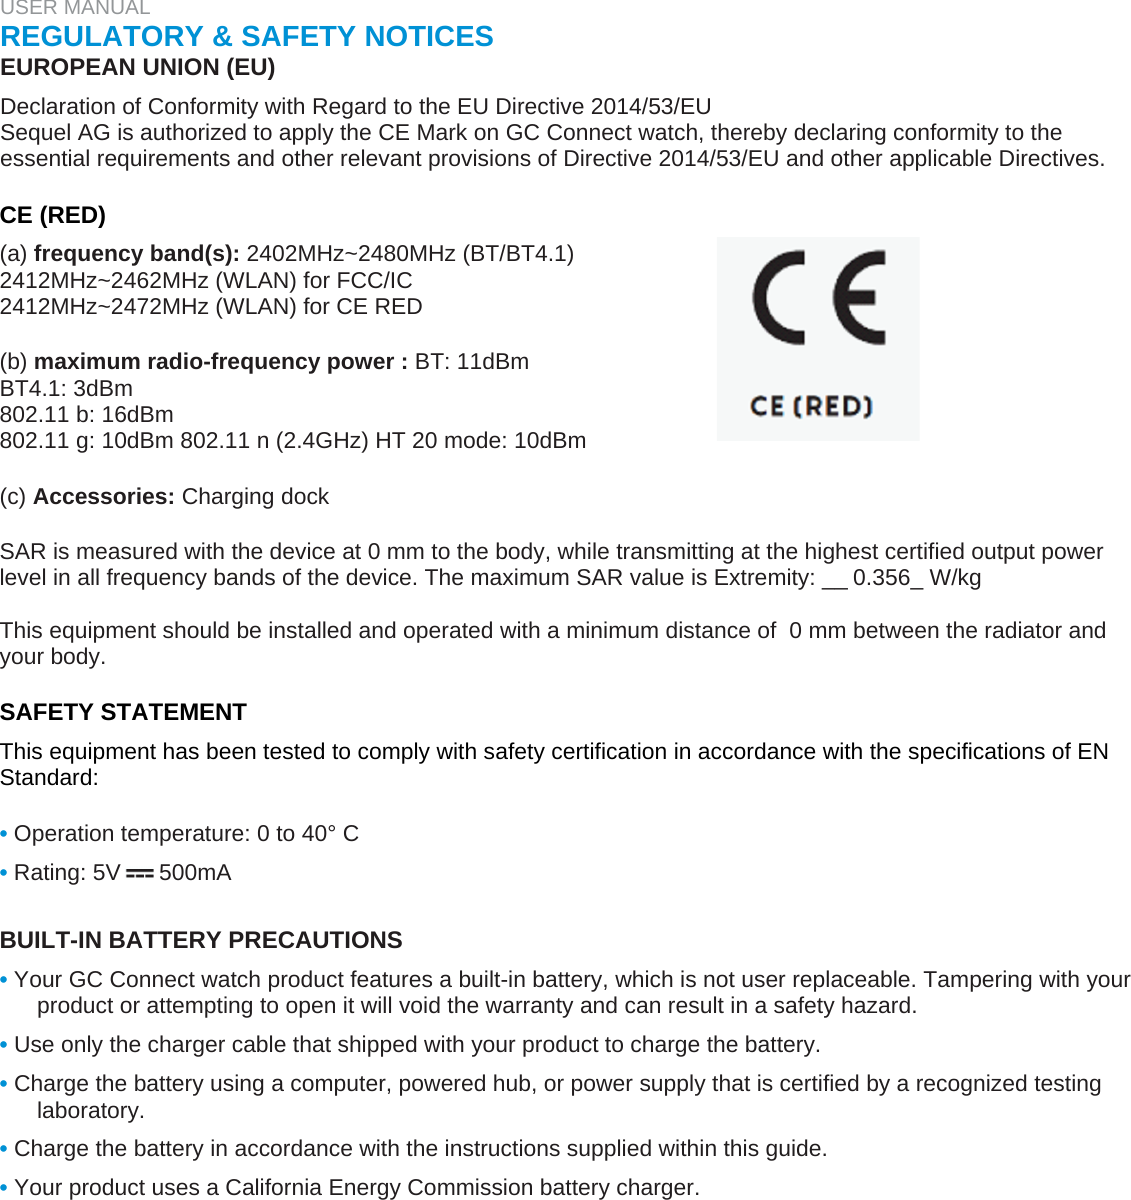 USER MANUAL  REGULATORY &amp; SAFETY NOTICES  EUROPEAN UNION (EU)  Declaration of Conformity with Regard to the EU Directive 2014/53/EU  Sequel AG is authorized to apply the CE Mark on GC Connect watch, thereby declaring conformity to the essential requirements and other relevant provisions of Directive 2014/53/EU and other applicable Directives.   CE (RED)  (a) frequency band(s): 2402MHz~2480MHz (BT/BT4.1)  2412MHz~2462MHz (WLAN) for FCC/IC  2412MHz~2472MHz (WLAN) for CE RED   (b) maximum radio-frequency power : BT: 11dBm  BT4.1: 3dBm  802.11 b: 16dBm  802.11 g: 10dBm 802.11 n (2.4GHz) HT 20 mode: 10dBm   (c) Accessories: Charging dock  SAR is measured with the device at 0 mm to the body, while transmitting at the highest certified output power level in all frequency bands of the device. The maximum SAR value is Extremity: __0.356_ W/kg  This equipment should be installed and operated with a minimum distance of  0 mm between the radiator and your body.  SAFETY STATEMENT  This equipment has been tested to comply with safety certification in accordance with the specifications of EN Standard:   • Operation temperature: 0 to 40° C  • Rating: 5V      500mA   BUILT-IN BATTERY PRECAUTIONS  • Your GC Connect watch product features a built-in battery, which is not user replaceable. Tampering with your product or attempting to open it will void the warranty and can result in a safety hazard.  • Use only the charger cable that shipped with your product to charge the battery.  • Charge the battery using a computer, powered hub, or power supply that is certified by a recognized testing laboratory.  • Charge the battery in accordance with the instructions supplied within this guide.  • Your product uses a California Energy Commission battery charger.   